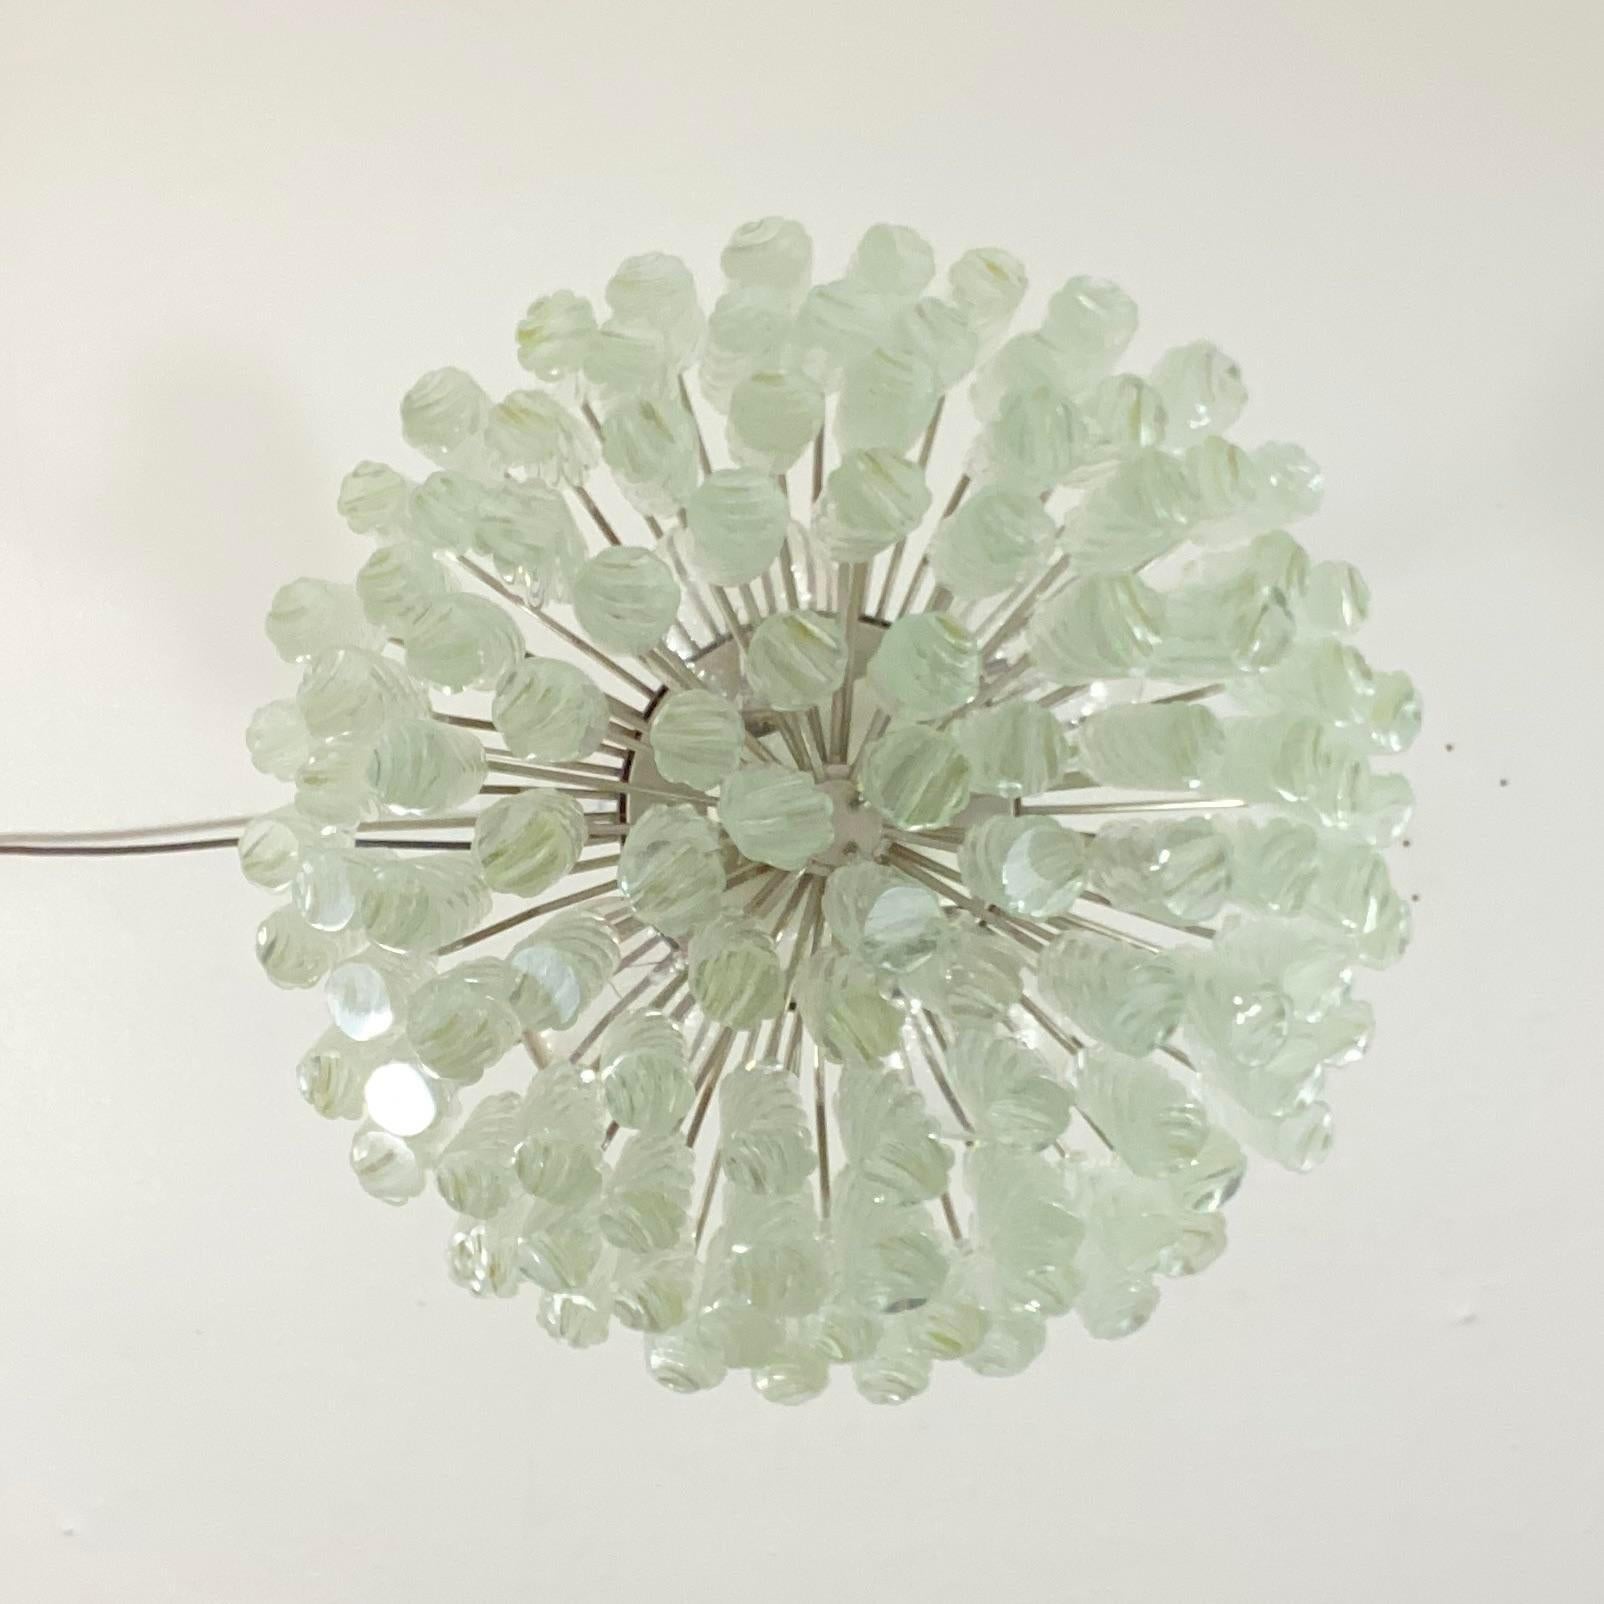 Metal 1960s Camer Spiral Murano Glass Chandelier For Sale